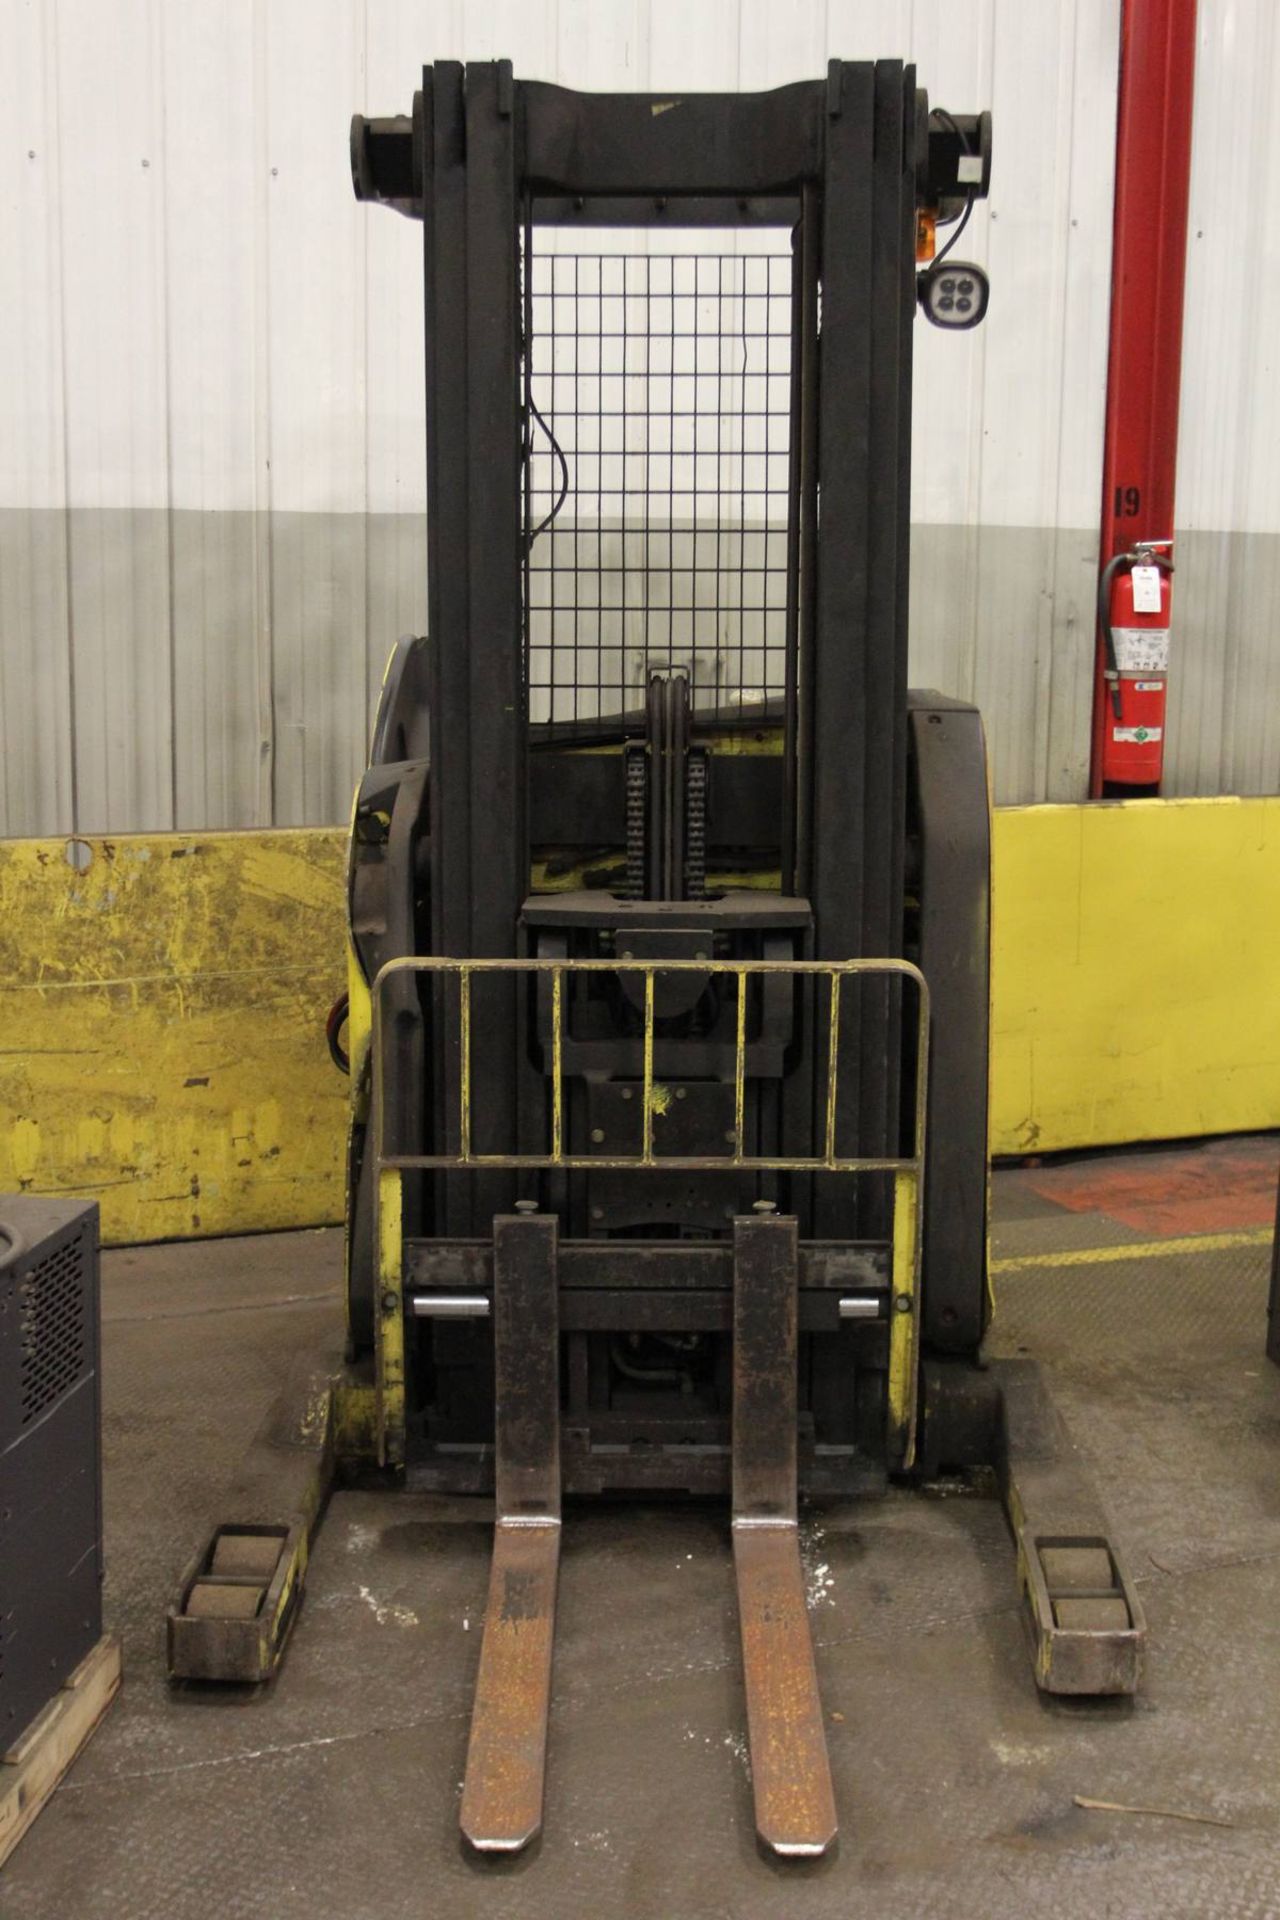 Hyster Model N40ZRS-14.5 3750 lb. Electric Reach Forklift Truck - Image 4 of 5